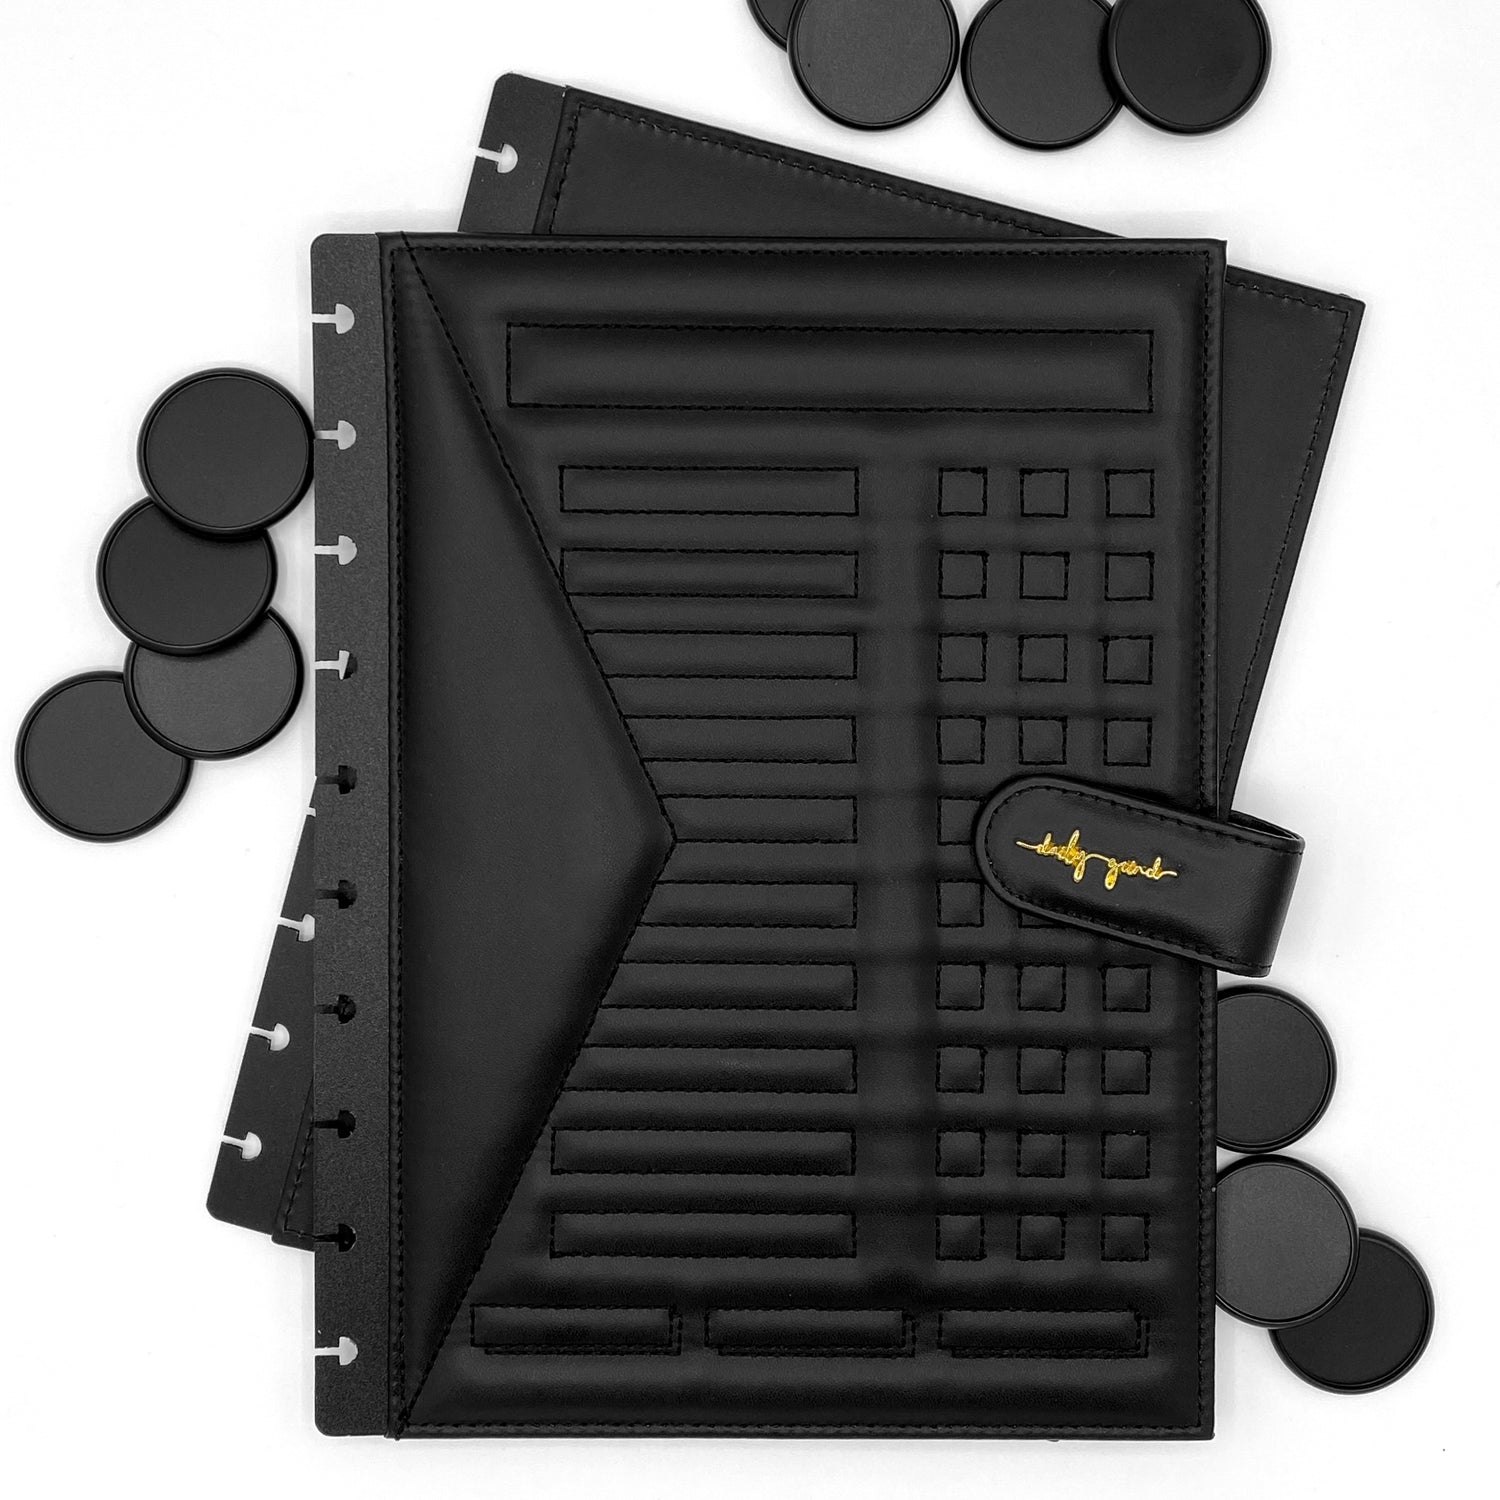 Black faux leather planner covers and discs